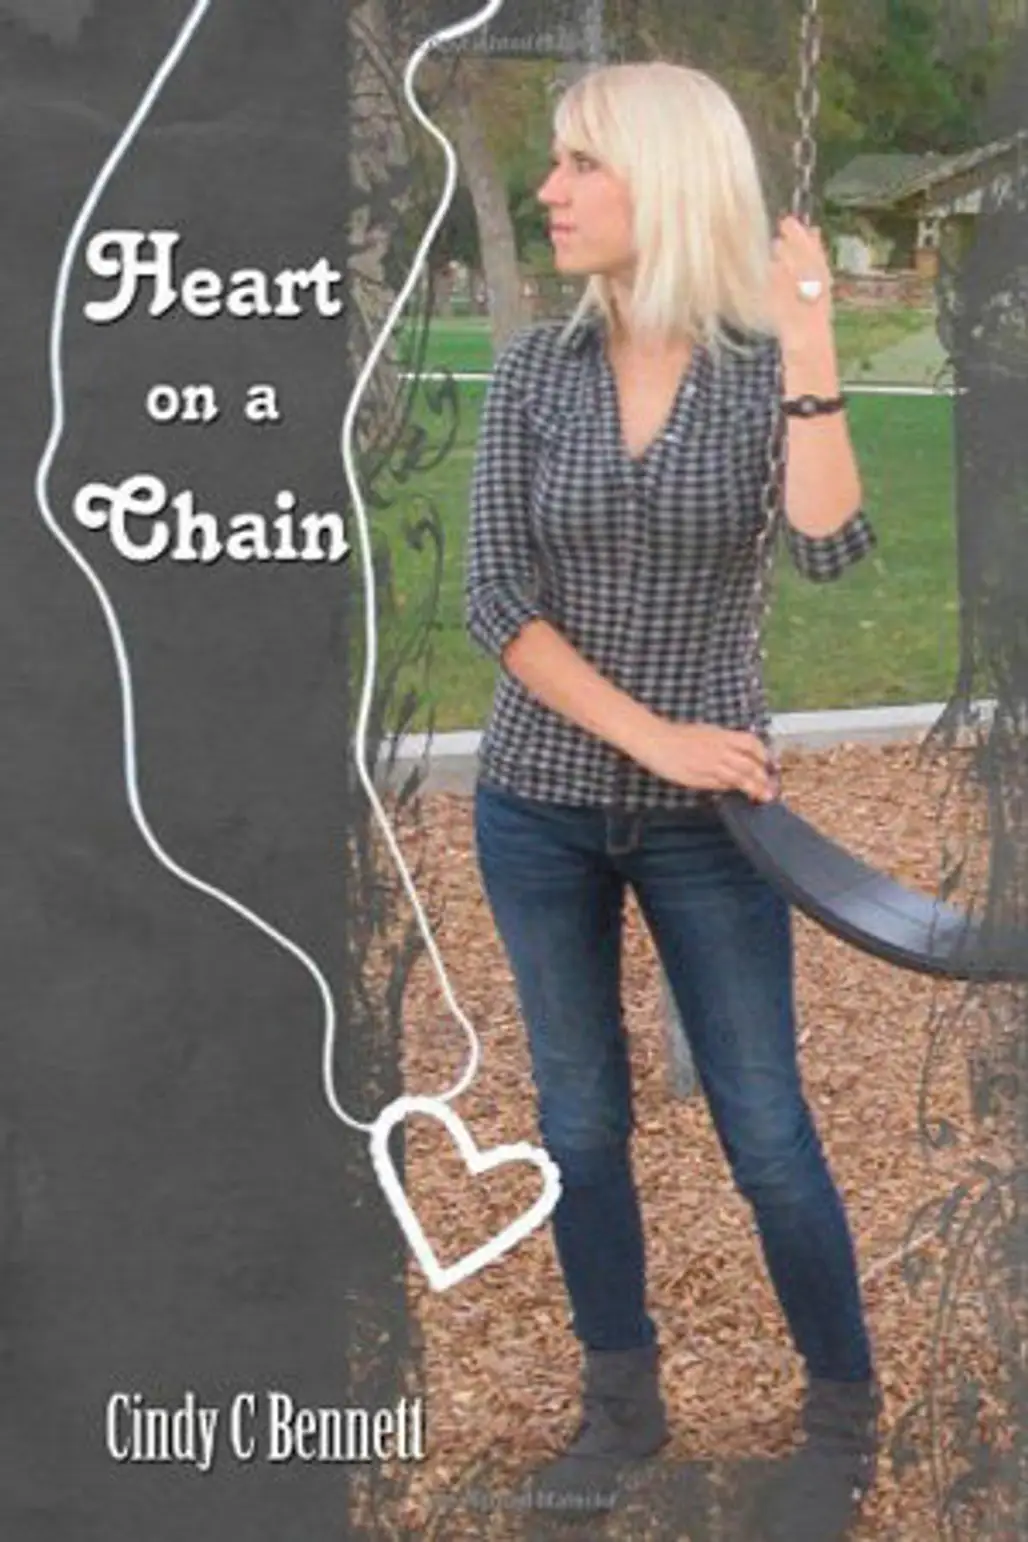 Heart on a Chain by Cindy C. Bennet